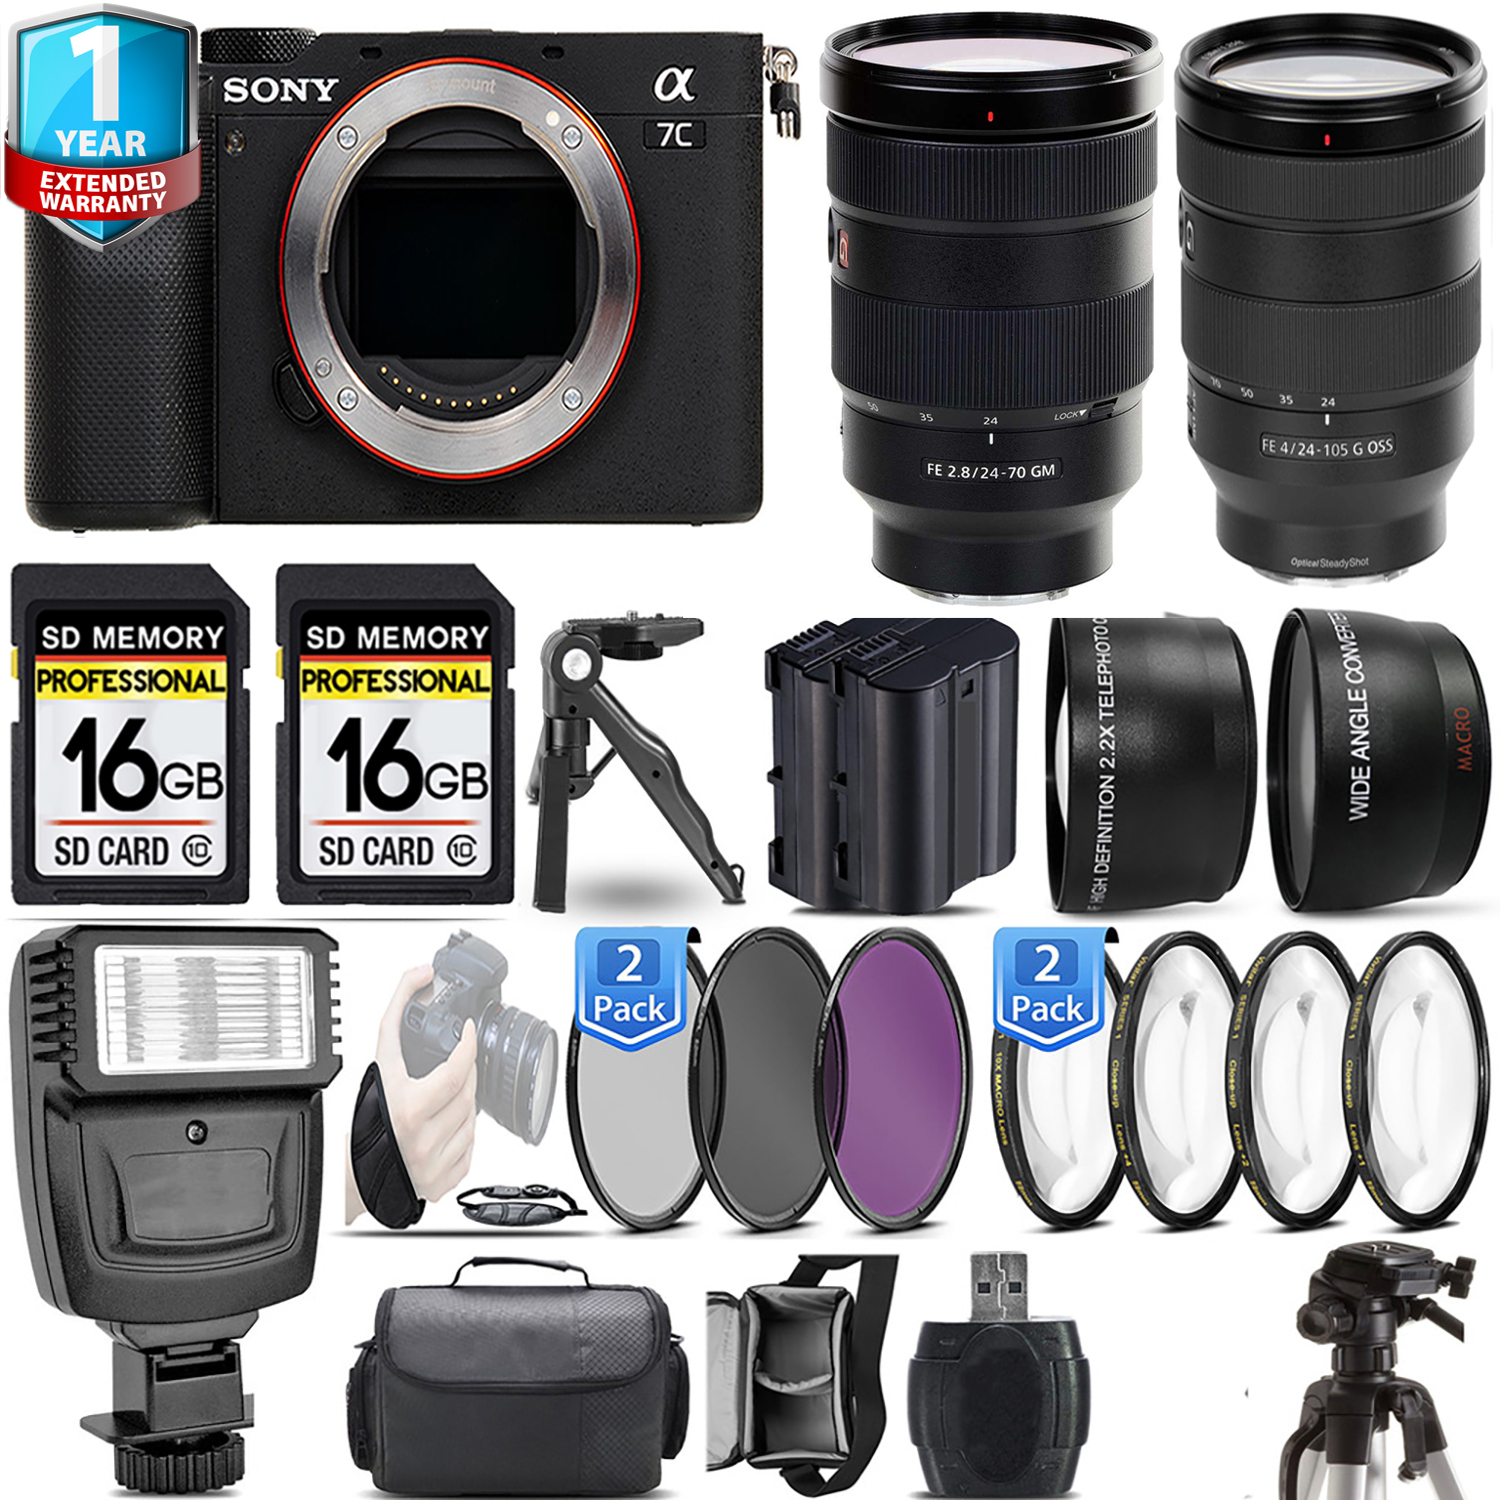 Alpha a7C Camera (Silver) + 24-70mm Lens + 70- 300mm + 1 Year Extended Warranty + 3 Piece Filter Set- Kit *FREE SHIPPING*